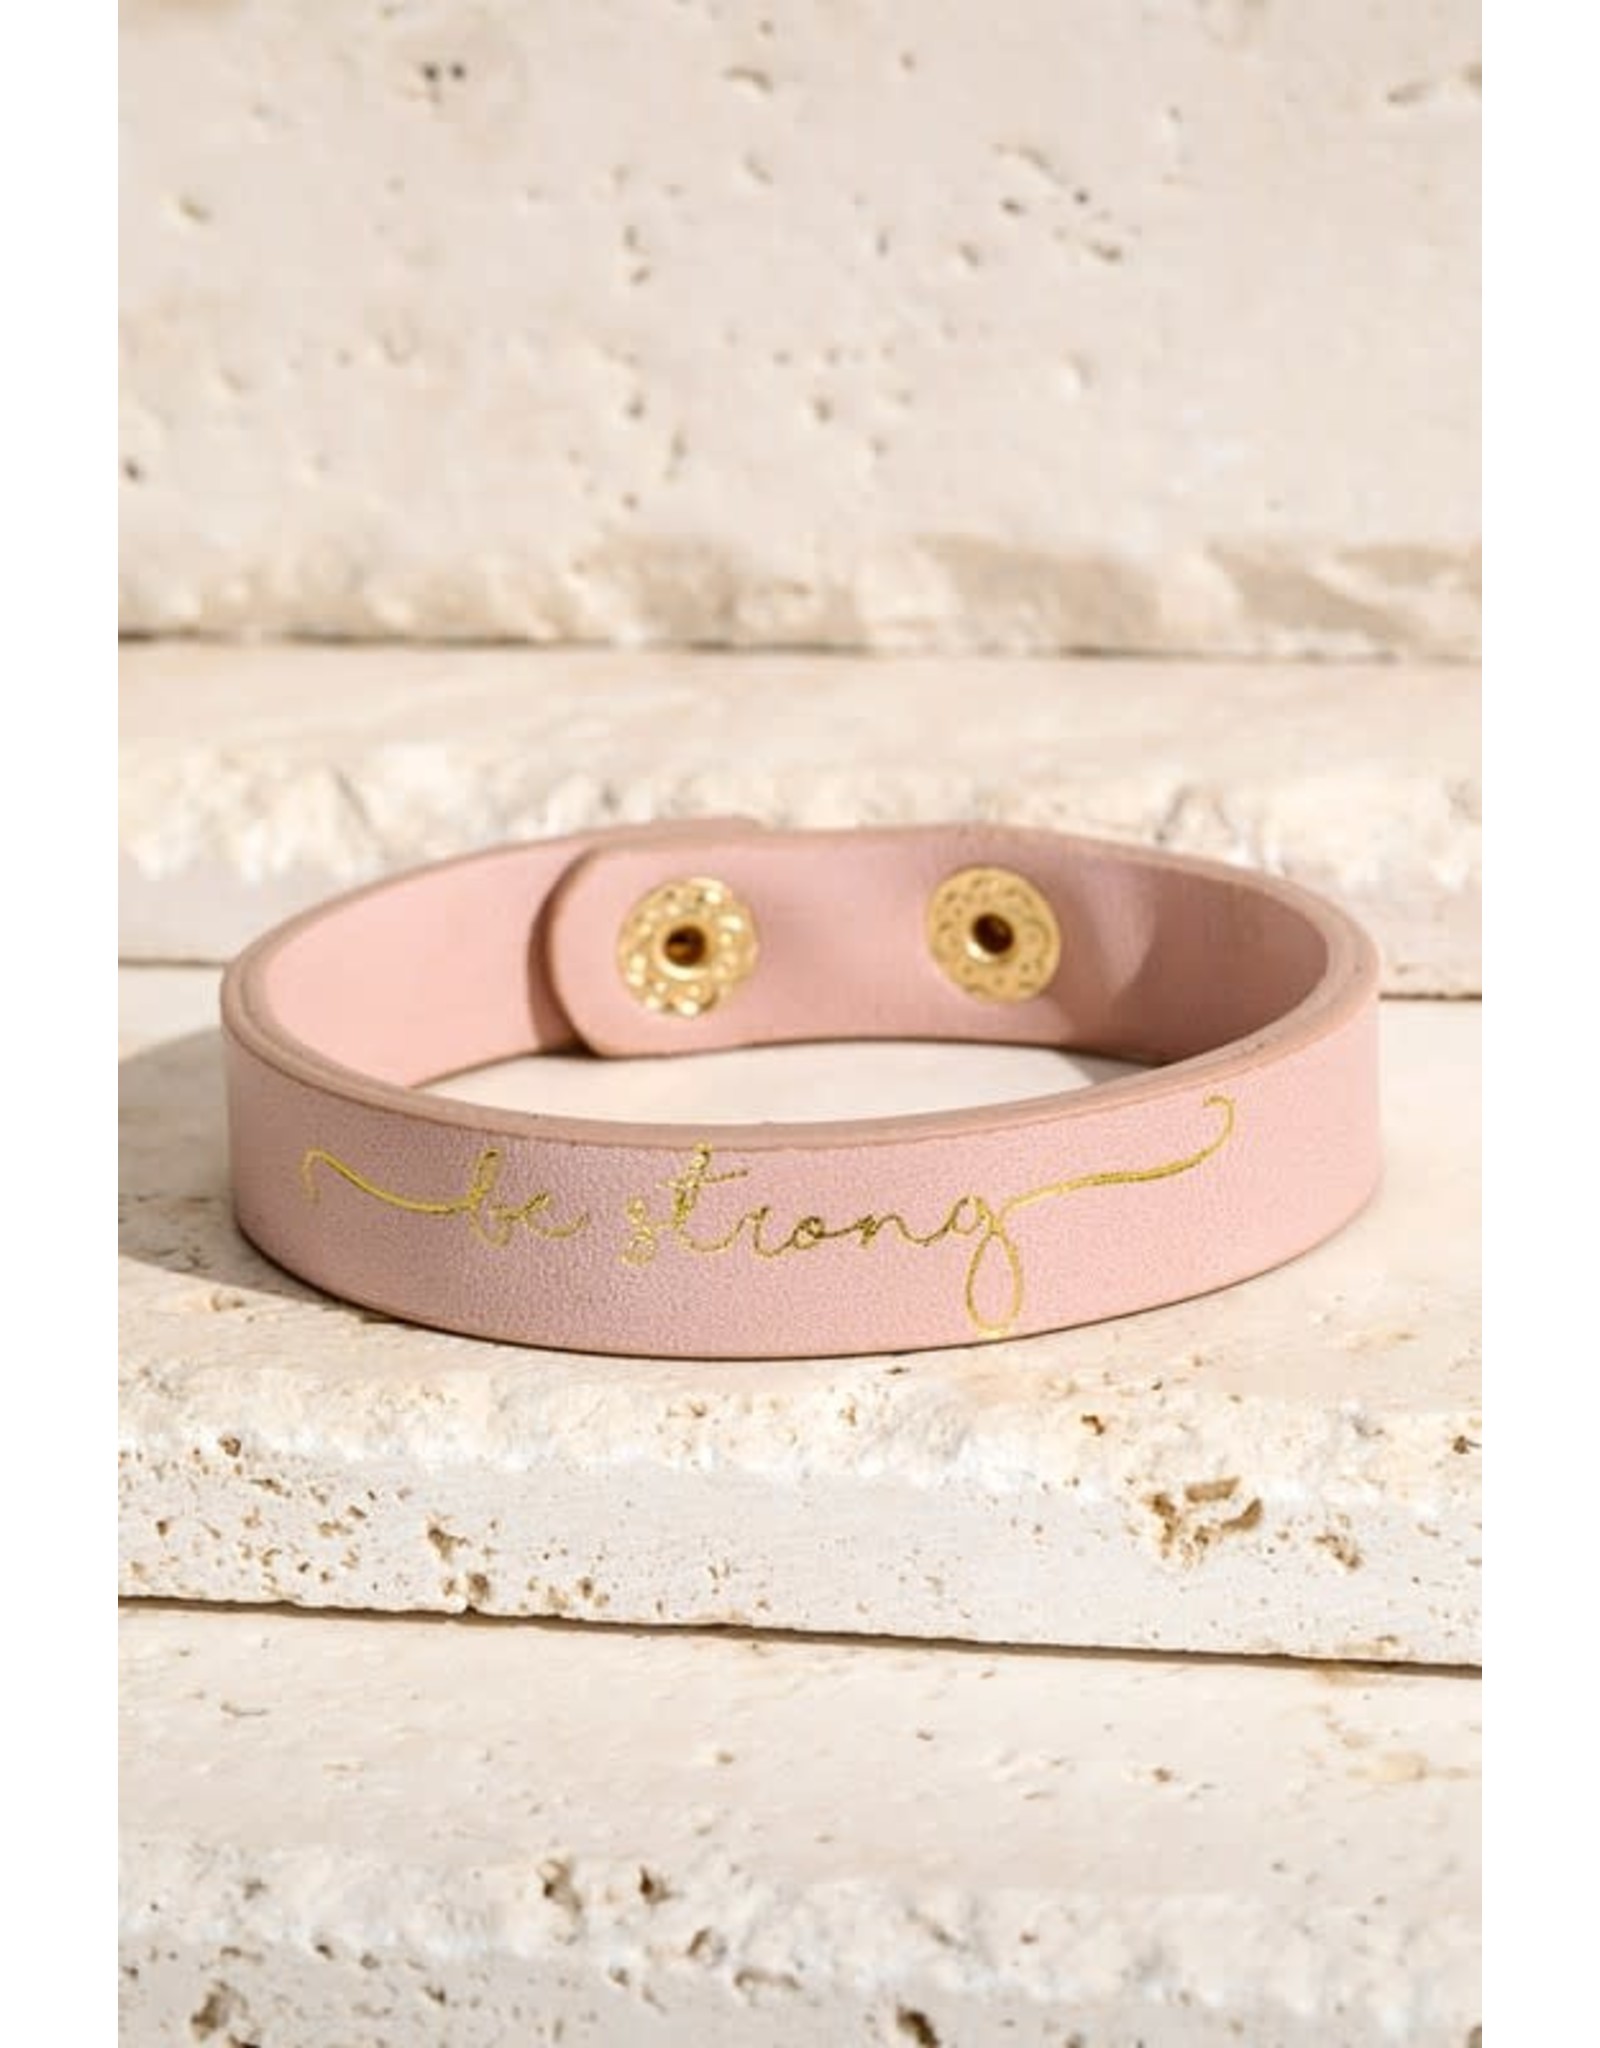 "Be Strong" Faux Leather Bracelet